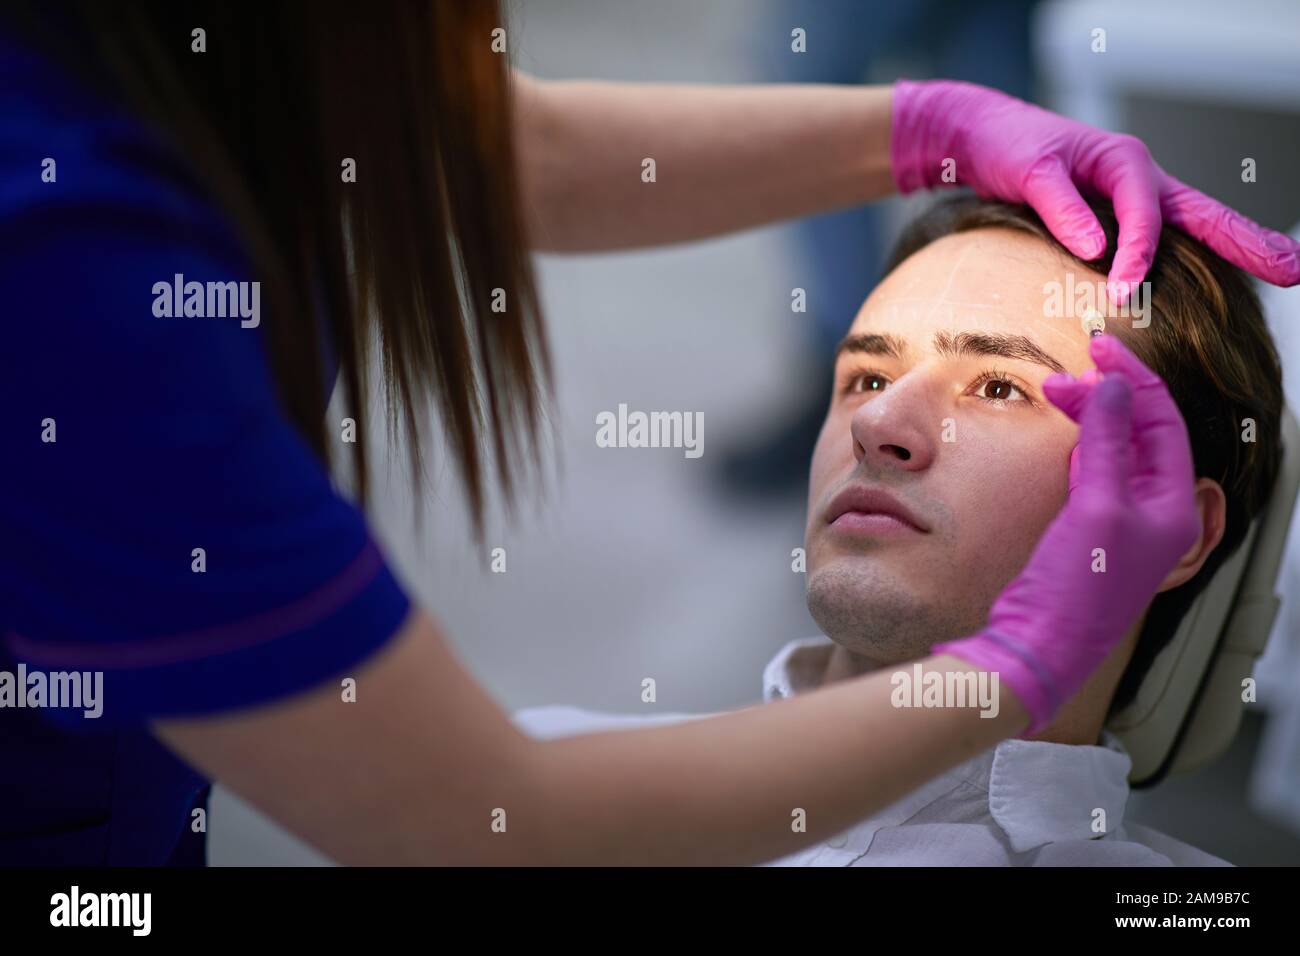 Nurse inserting anti aging substance beneath the forehead skin of a man Stock Photo